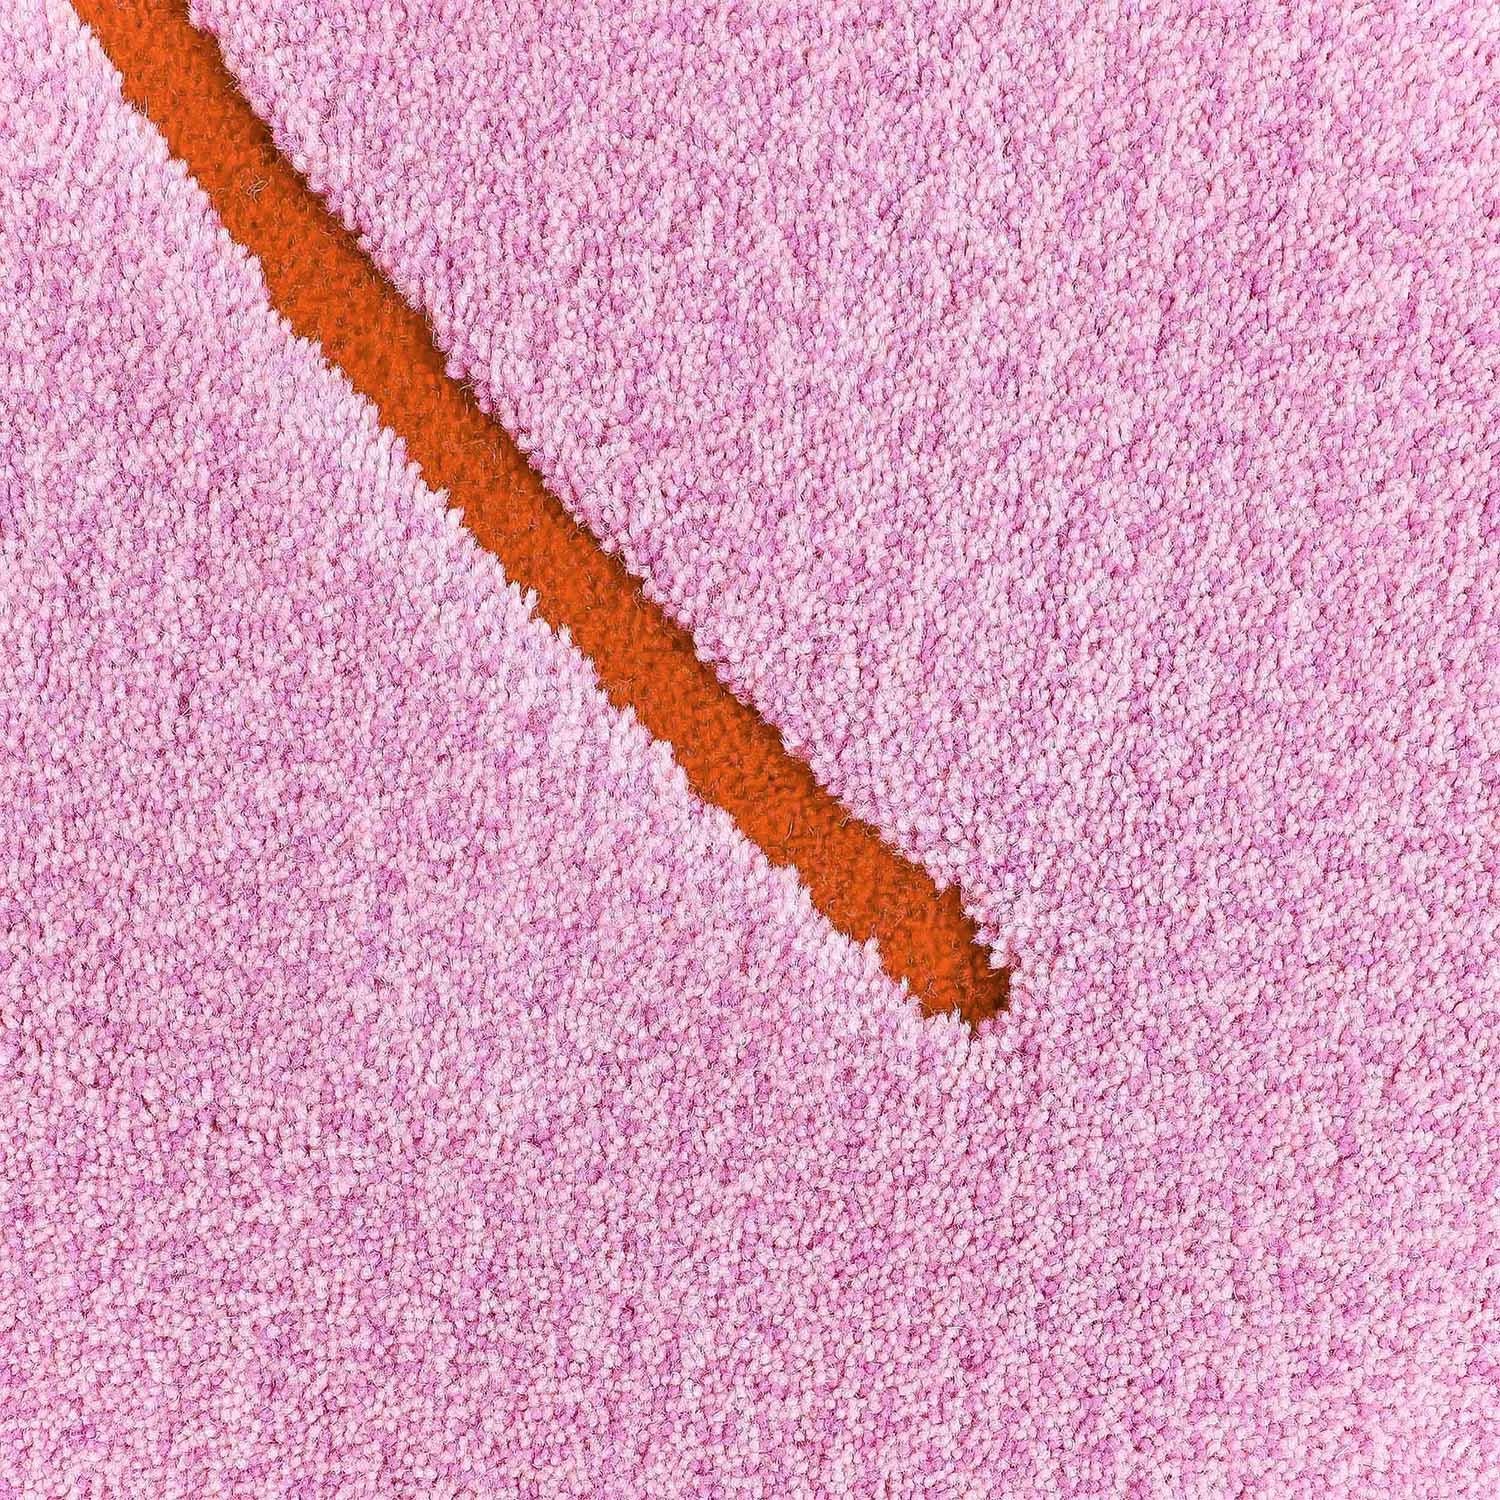 Pink Mélange Squiggle features a durable wool surface. A statement rug for your hallway, entryway or bedside.

Size: 3.5 x 11 ft 
Material: Wool
Color: Pink & Purple Mélange + Bright Orange*
Made in Sweden

*Colors may vary due to lighting and